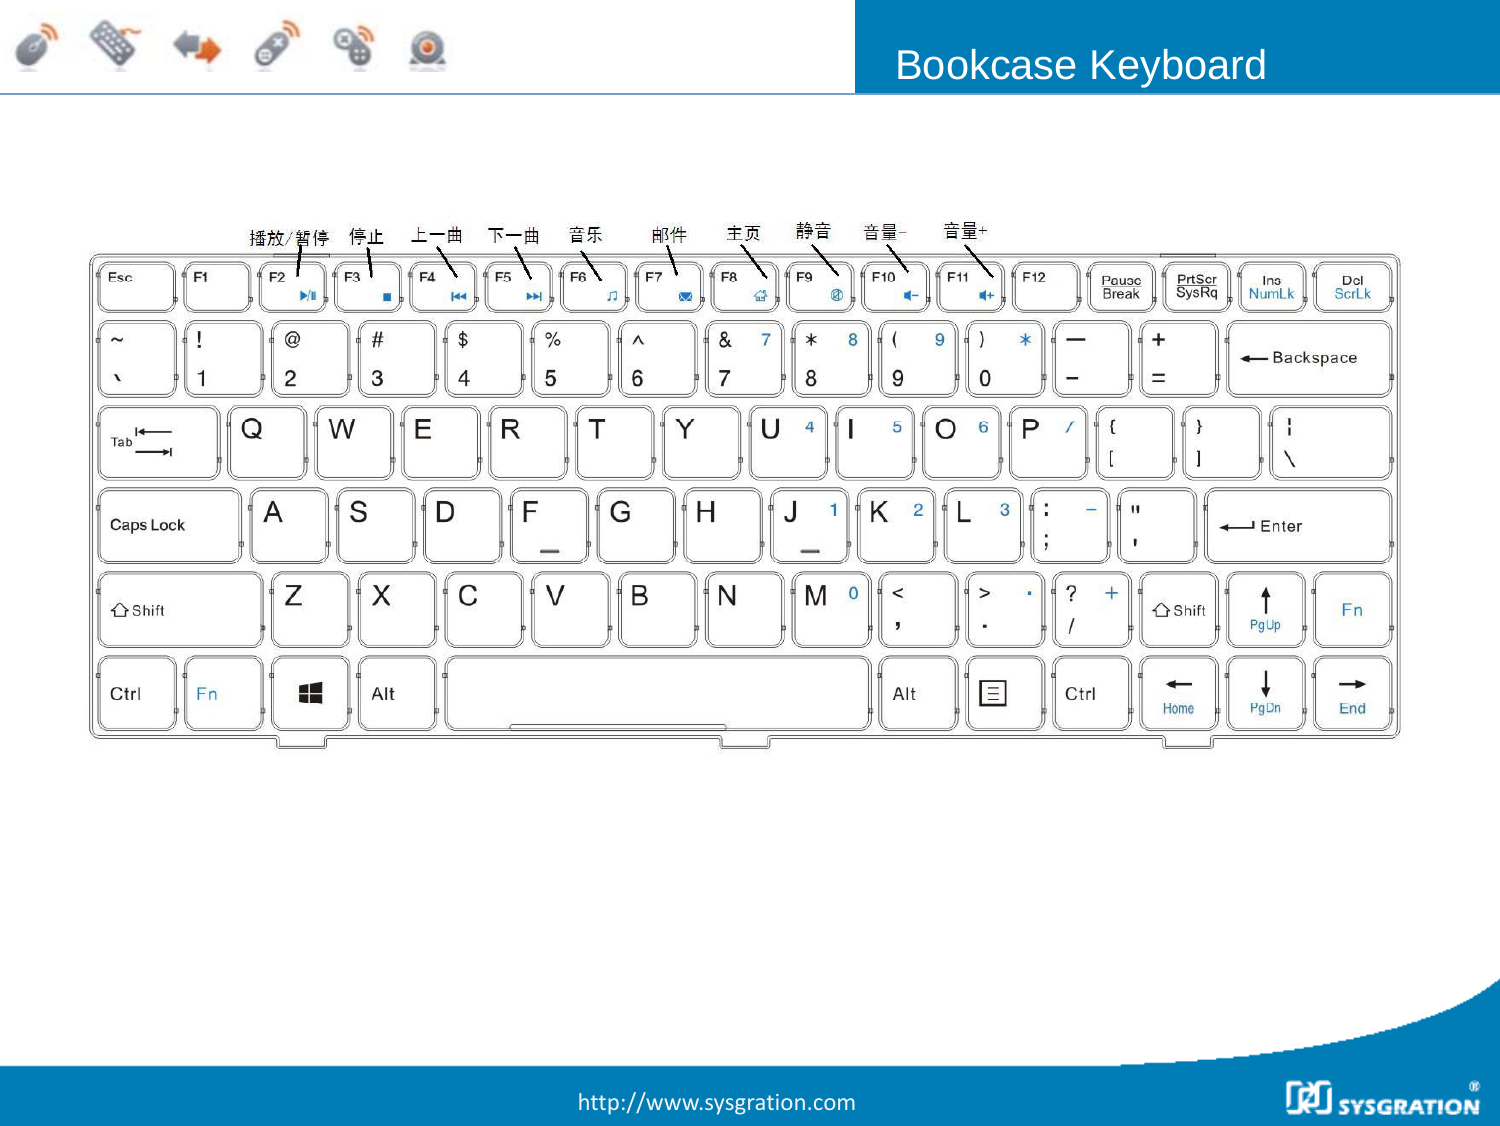 Bookcase Keyboardhttp://www.sysgration.com